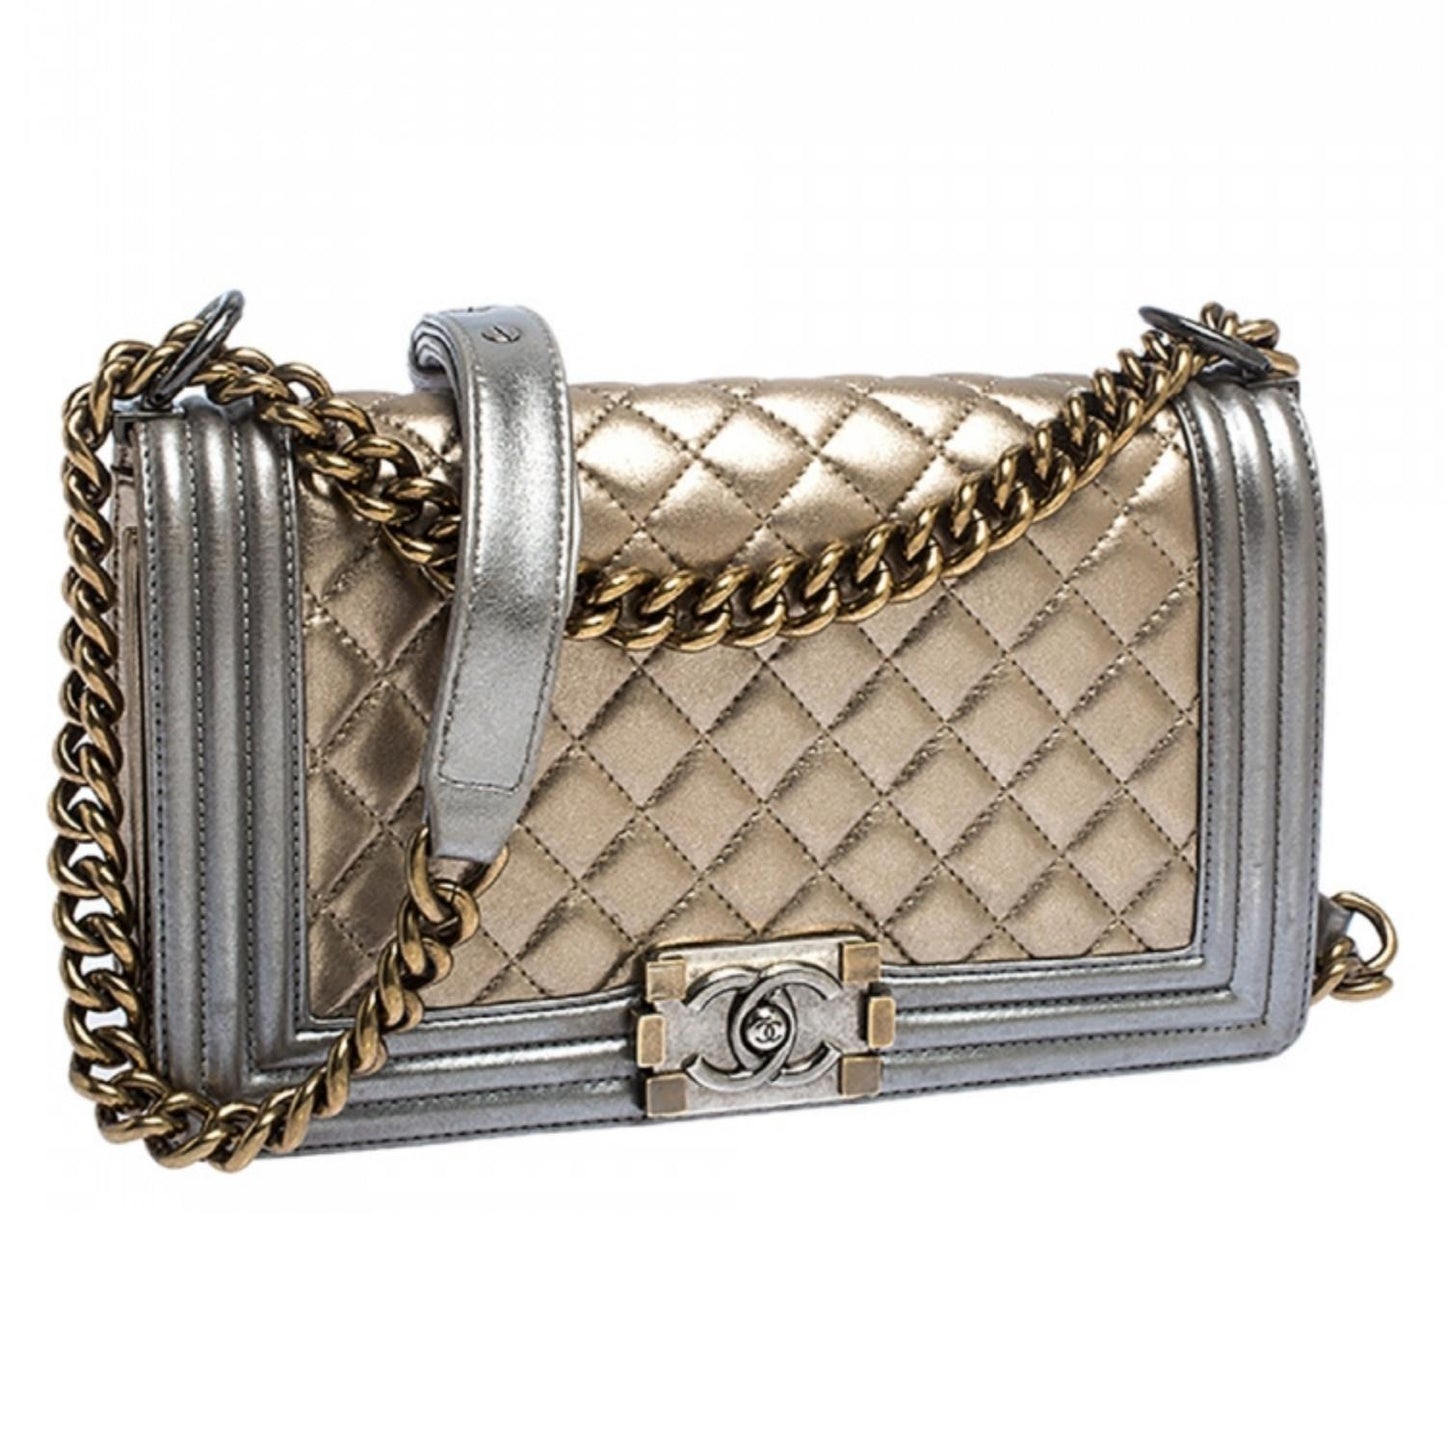 Chanel Gold/Grey Quilted Leather Medium Boy Flap Bag